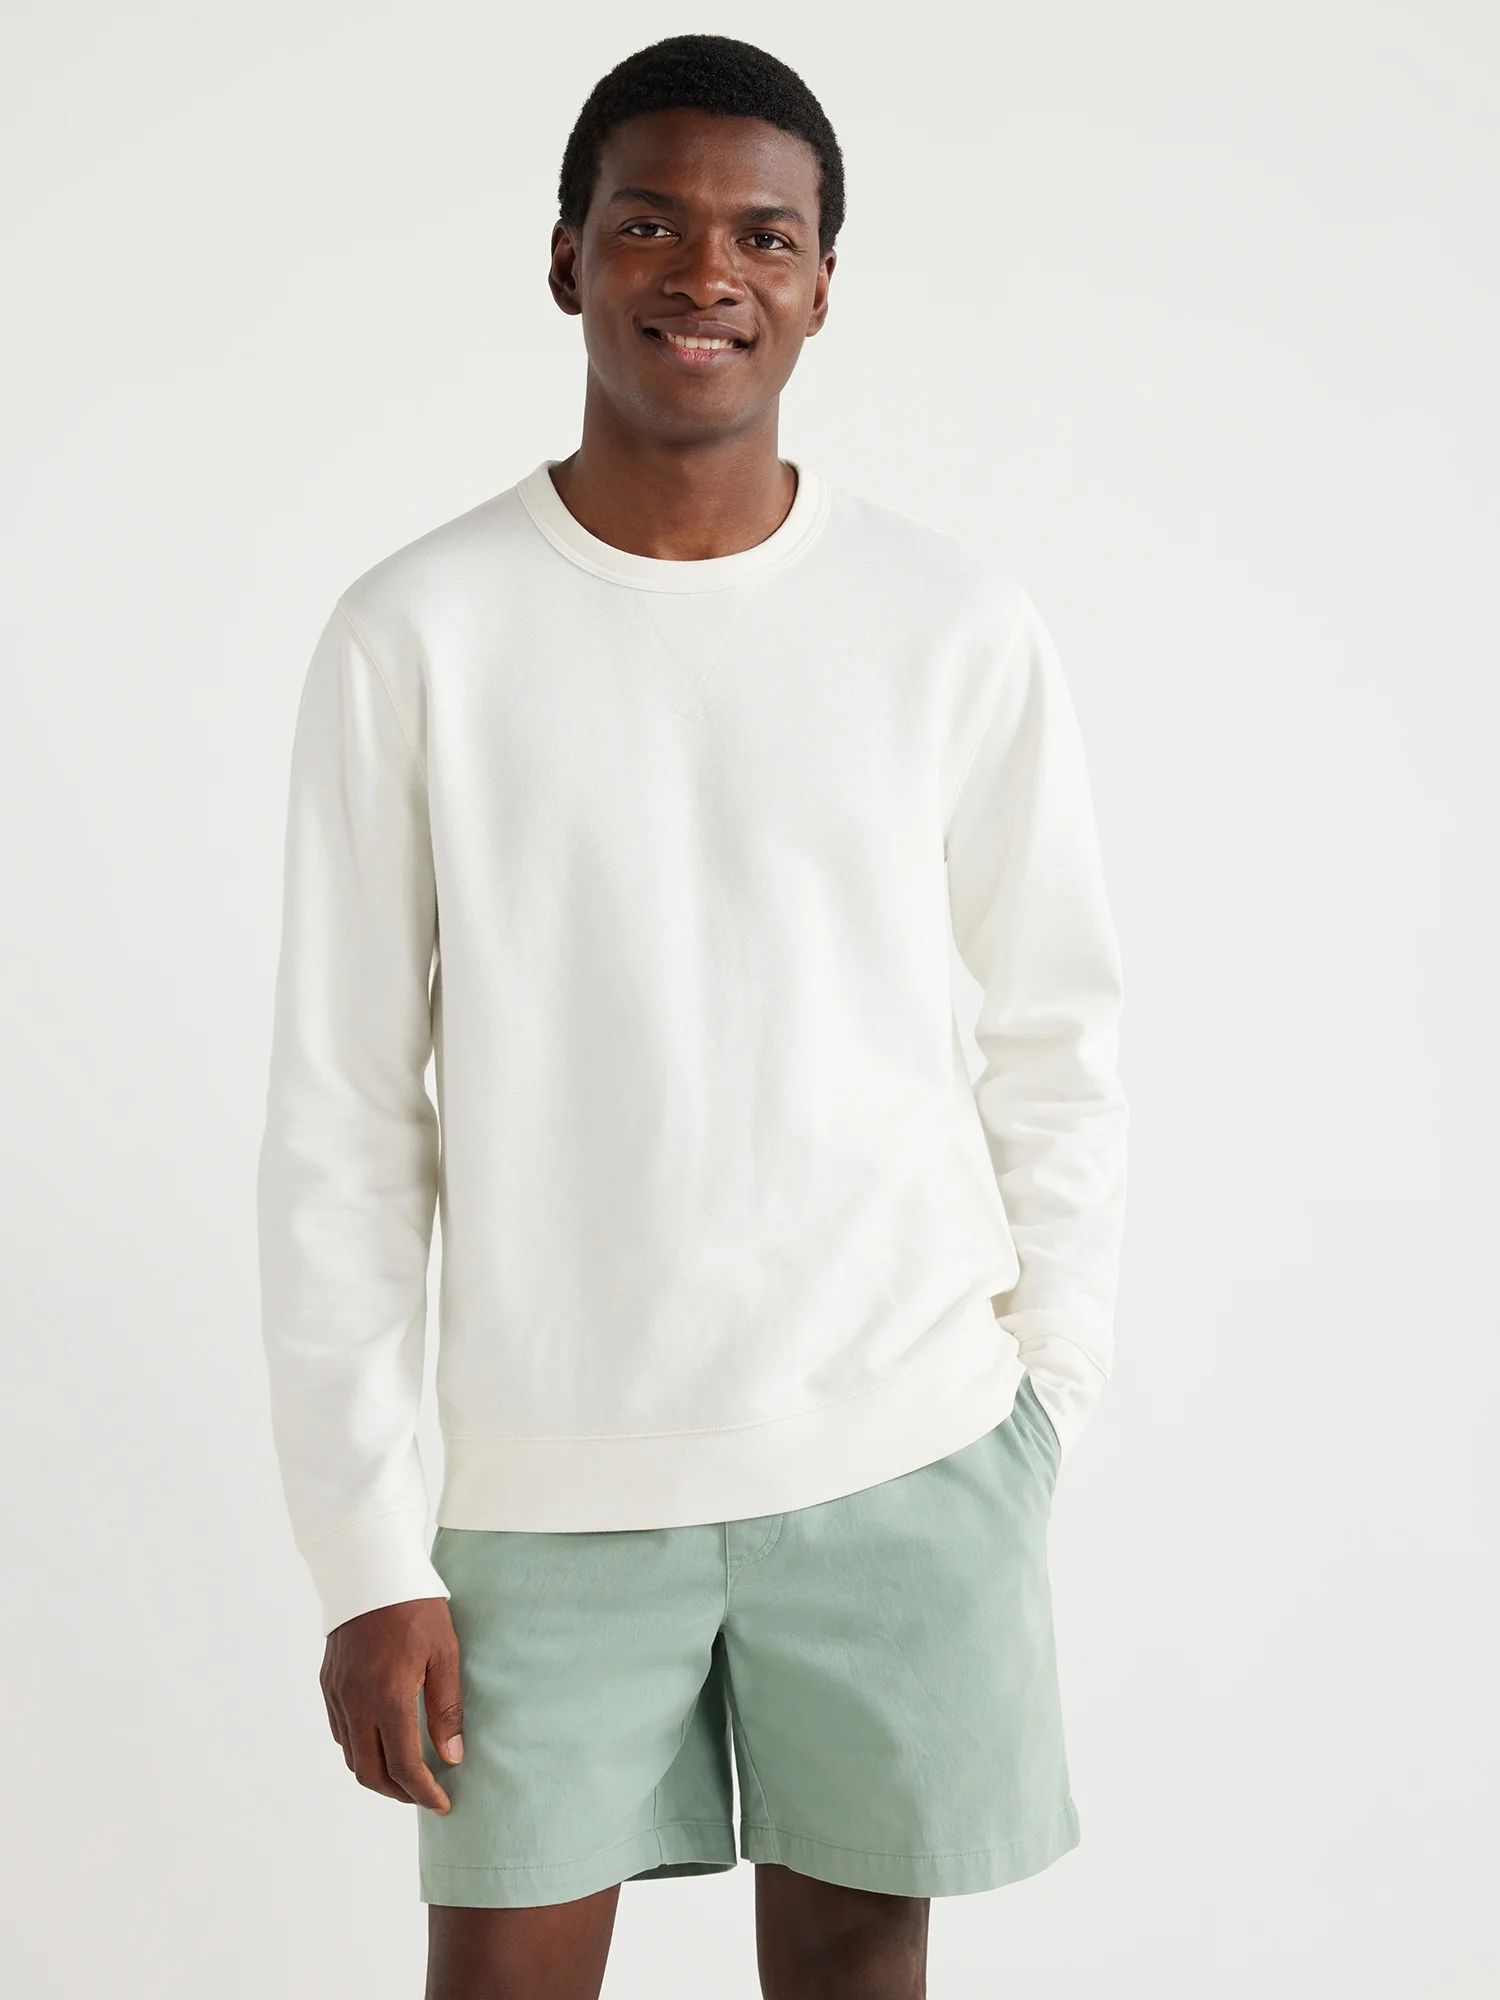 Free Assembly Men's Crewneck Sweatshirt with Long Sleeves, Sizes S-3XL | Walmart (US)